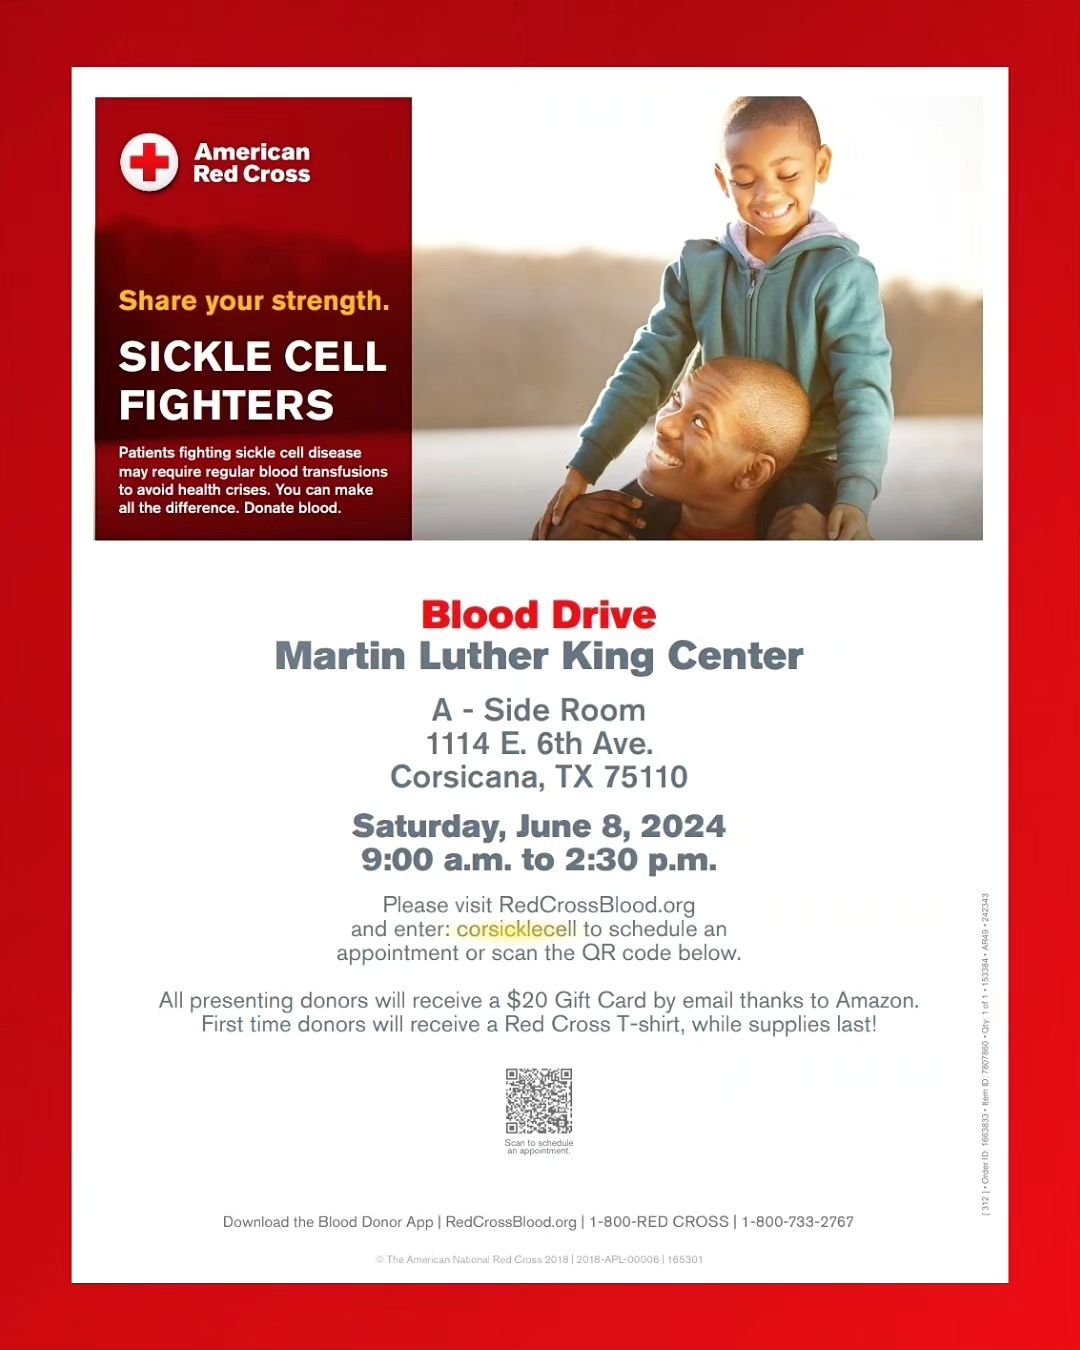 UPCOMING SICKLE CELL BLOOD DRIVE 🩸

I'm partnering with the Red Cross for this year's Juneteenth Sickle cell Blood Drive.

We're looking for a few good folks to sign up. Your donation will help those in need and besides the obligatory snacks and T-s